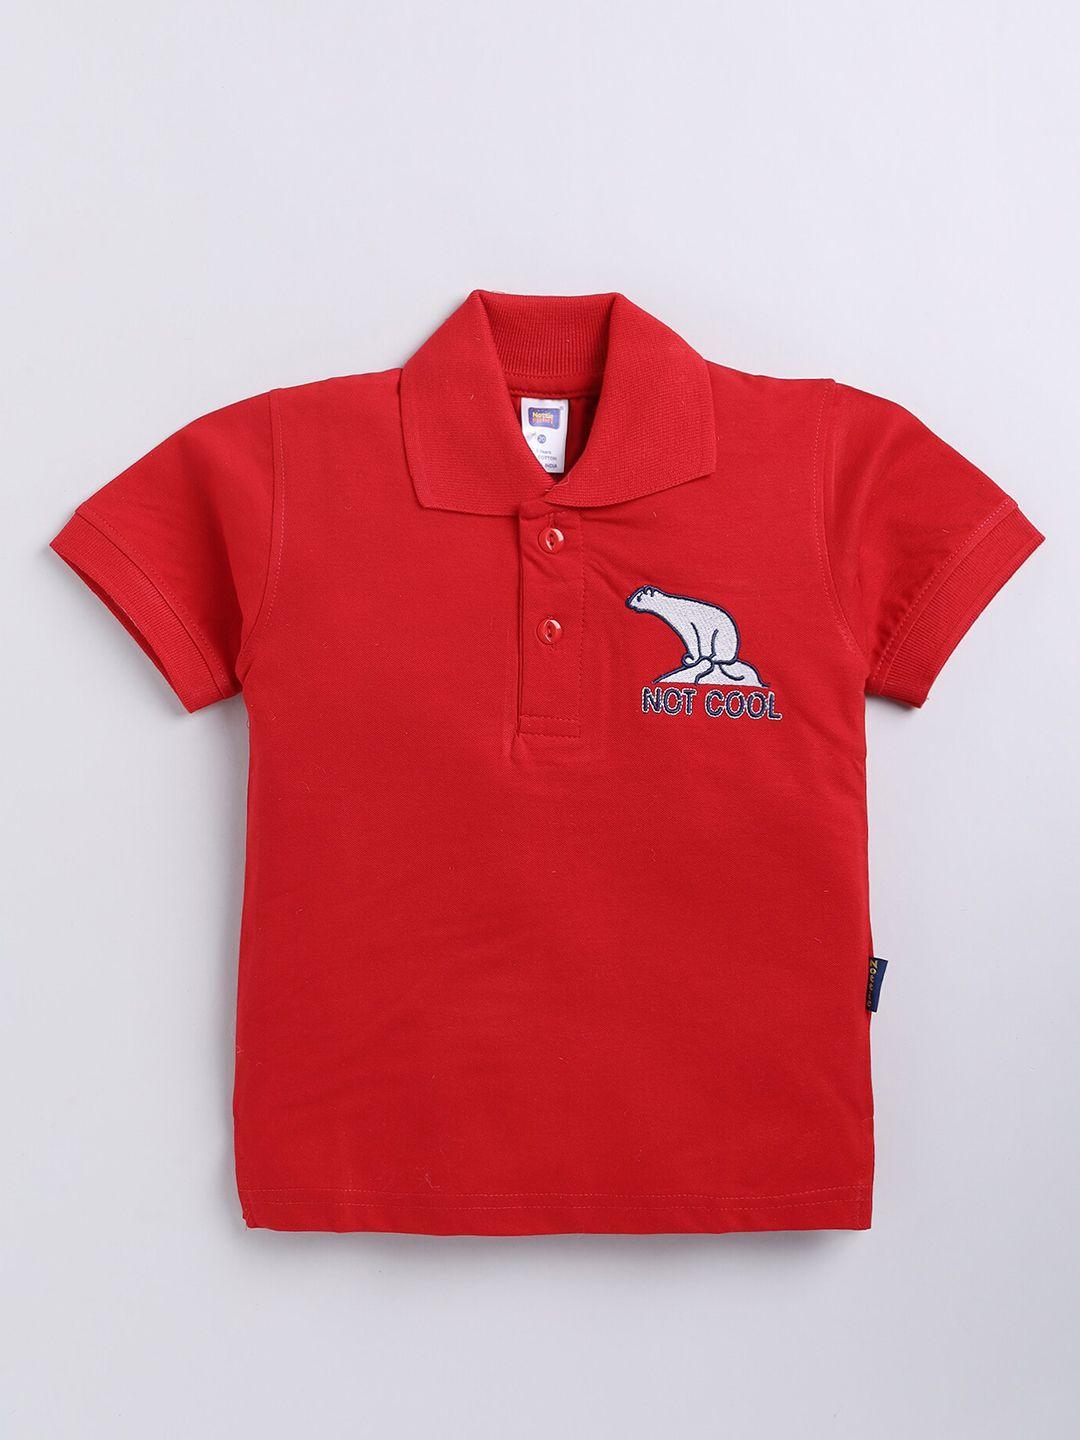 nottie planet boys graphic embroidered detail polo collar t-shirt